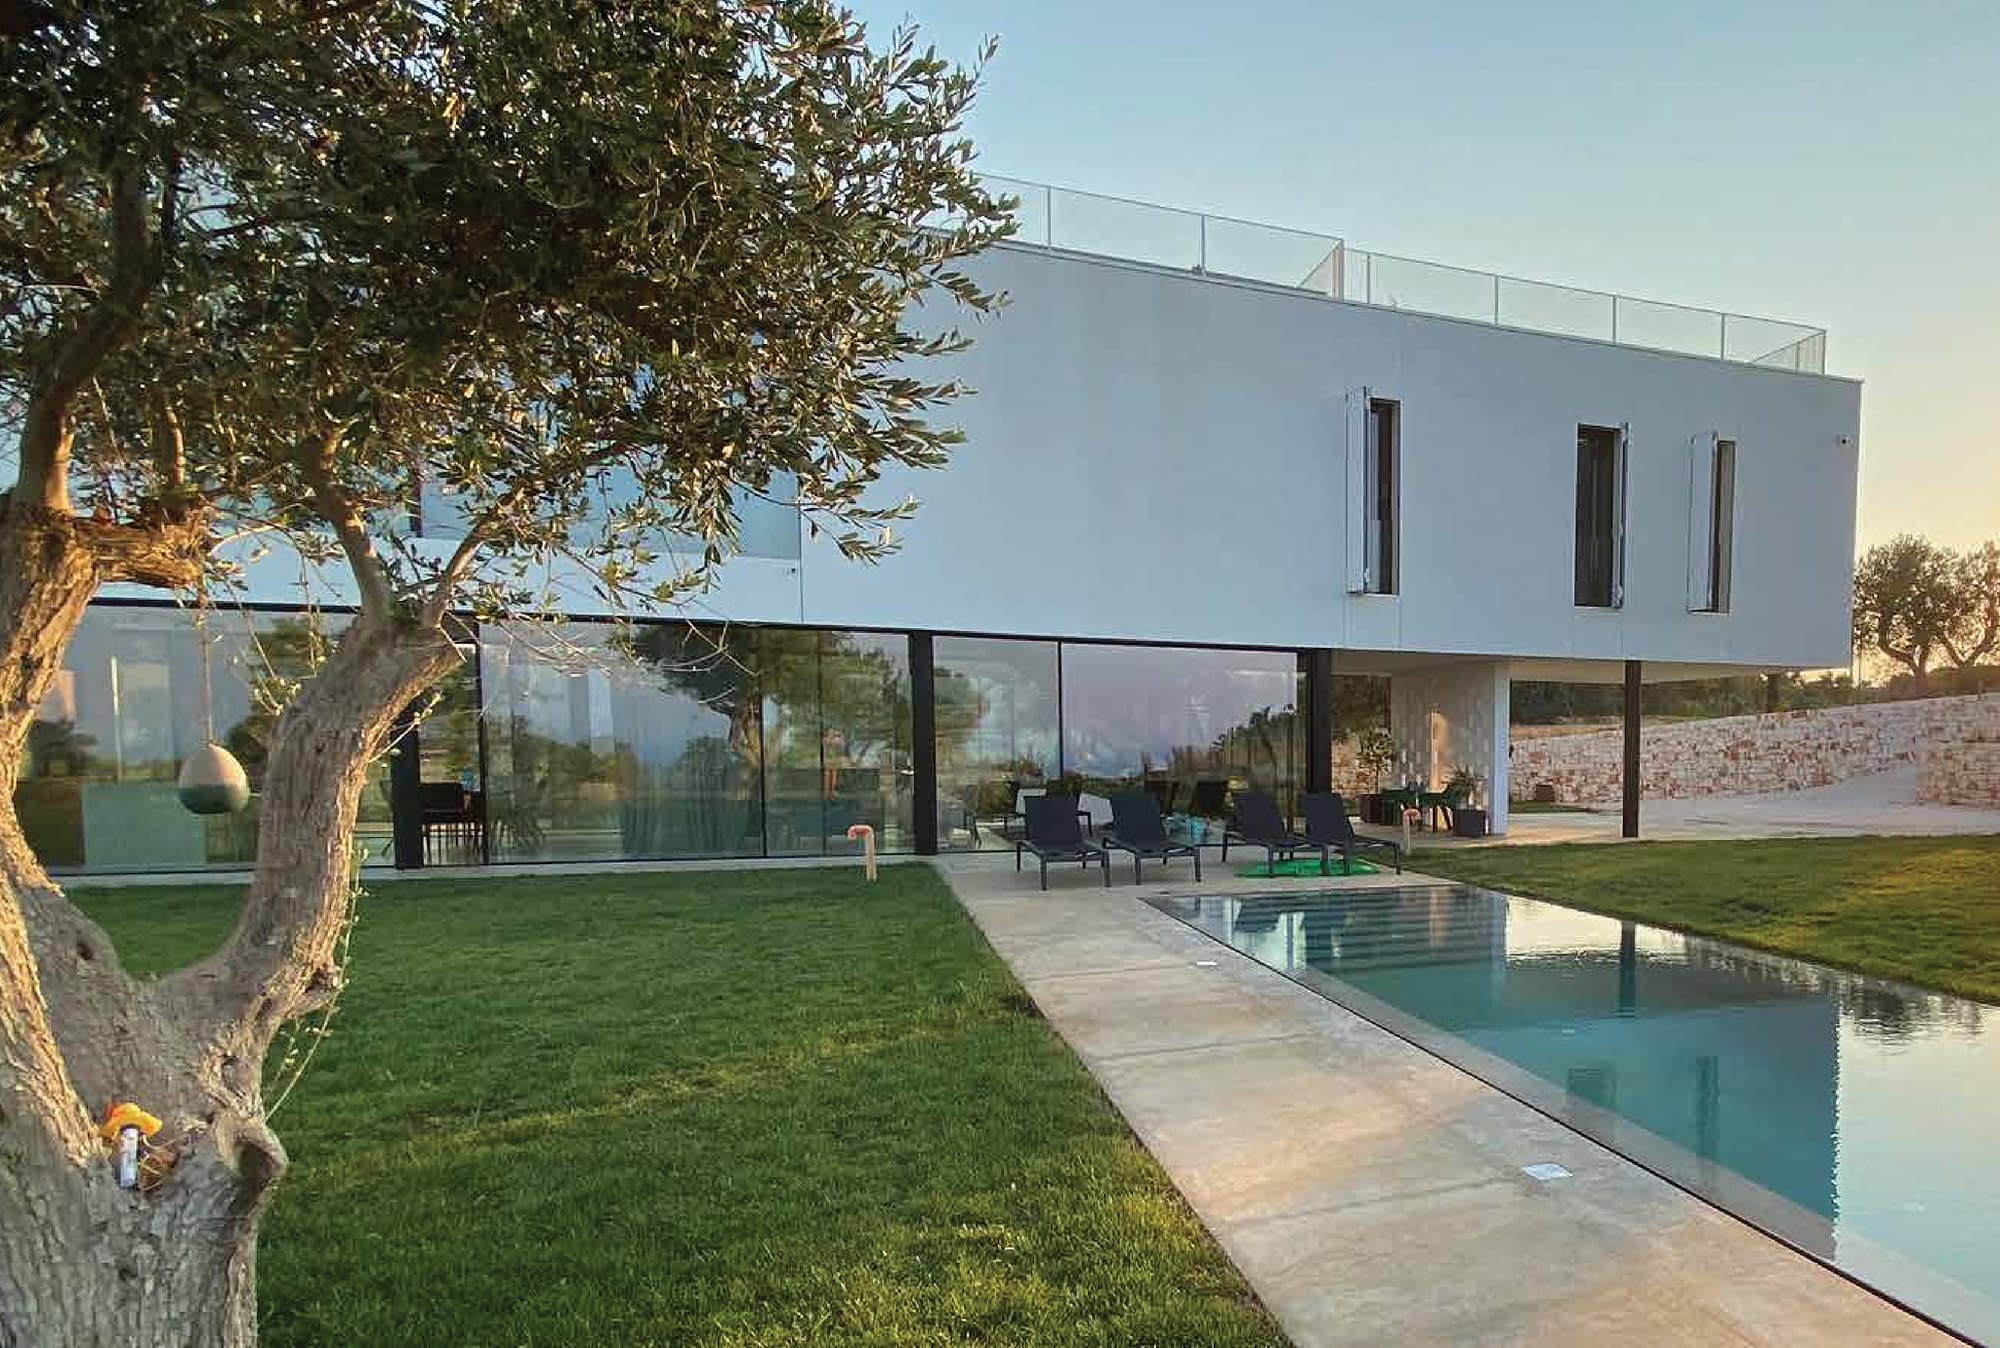 Minimal frame aluminum windows and door systems were used in this contemporary Italian villa for expansive views